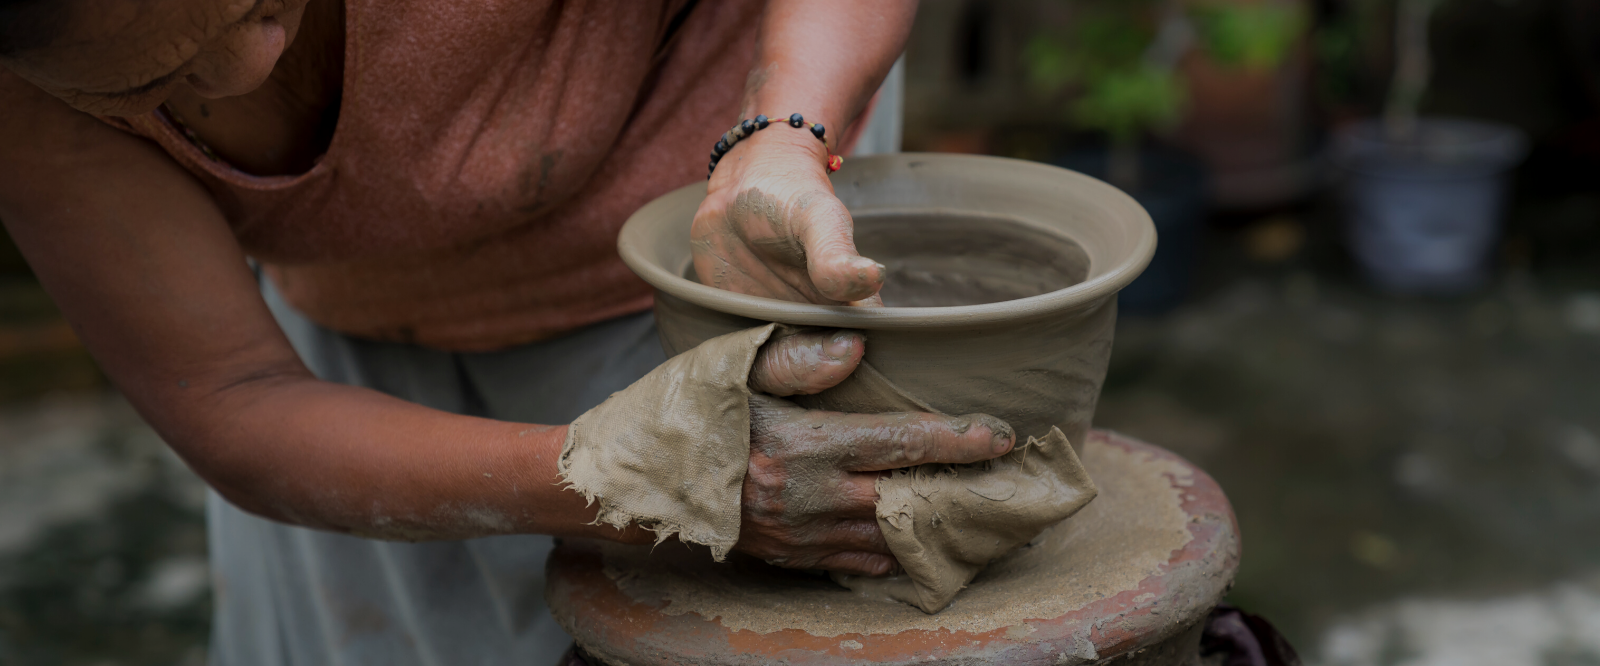 woman making pottery for holistic skin care